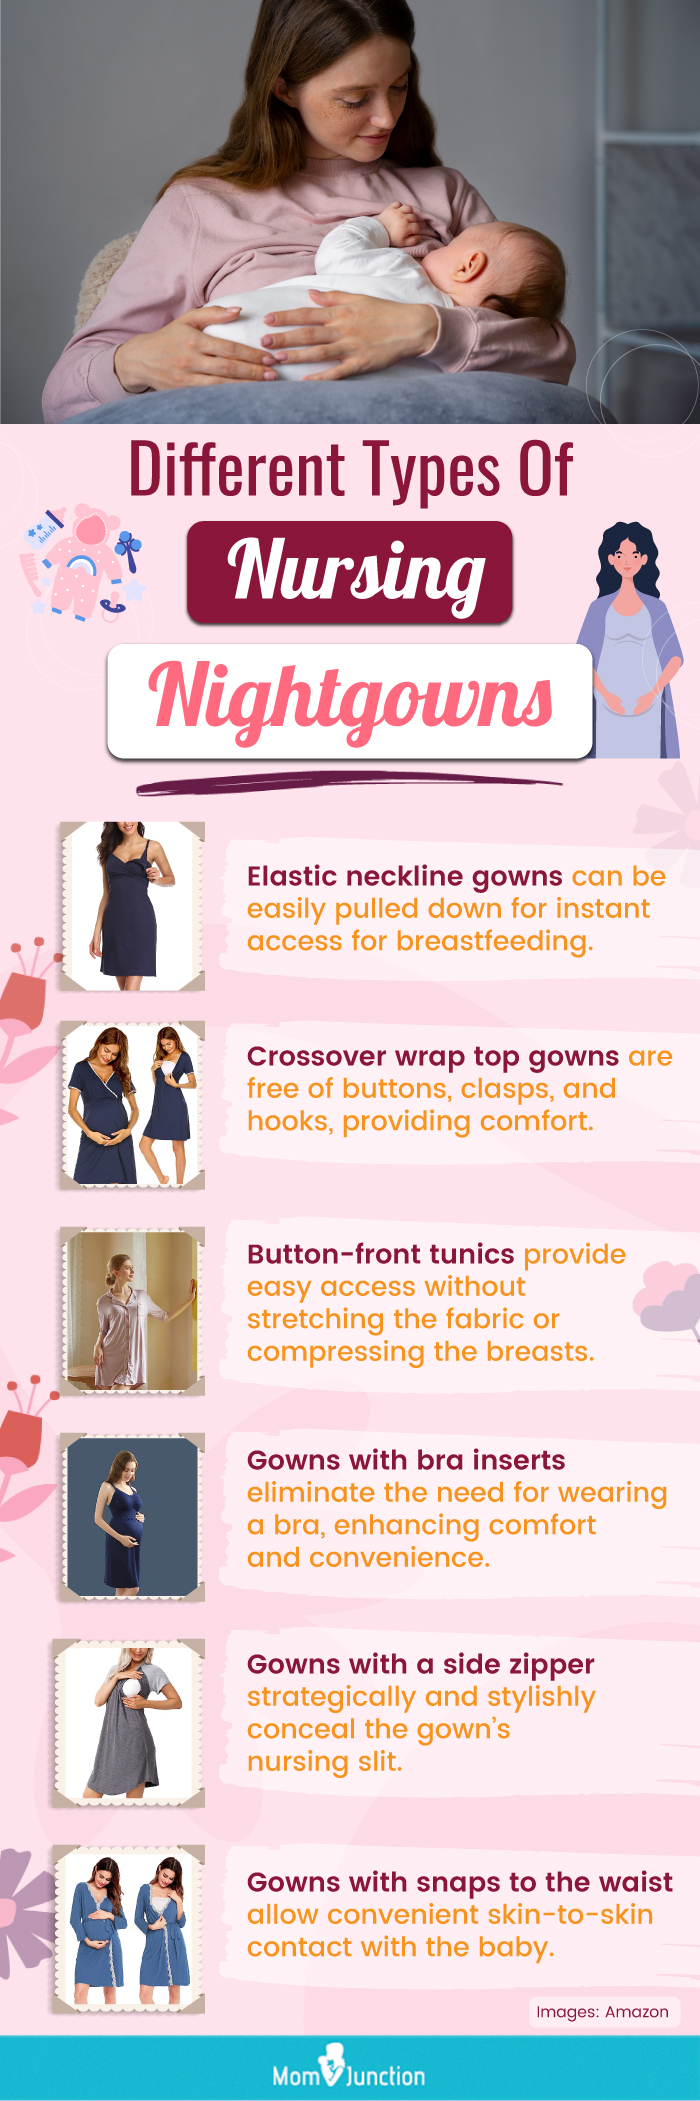 SWOMOG Maternity Nursing Gown and Robe Set 3in1 Labor Hospital Delivery 2  Pcs Nightgown for Breastfeeding Lace Nursing Dress